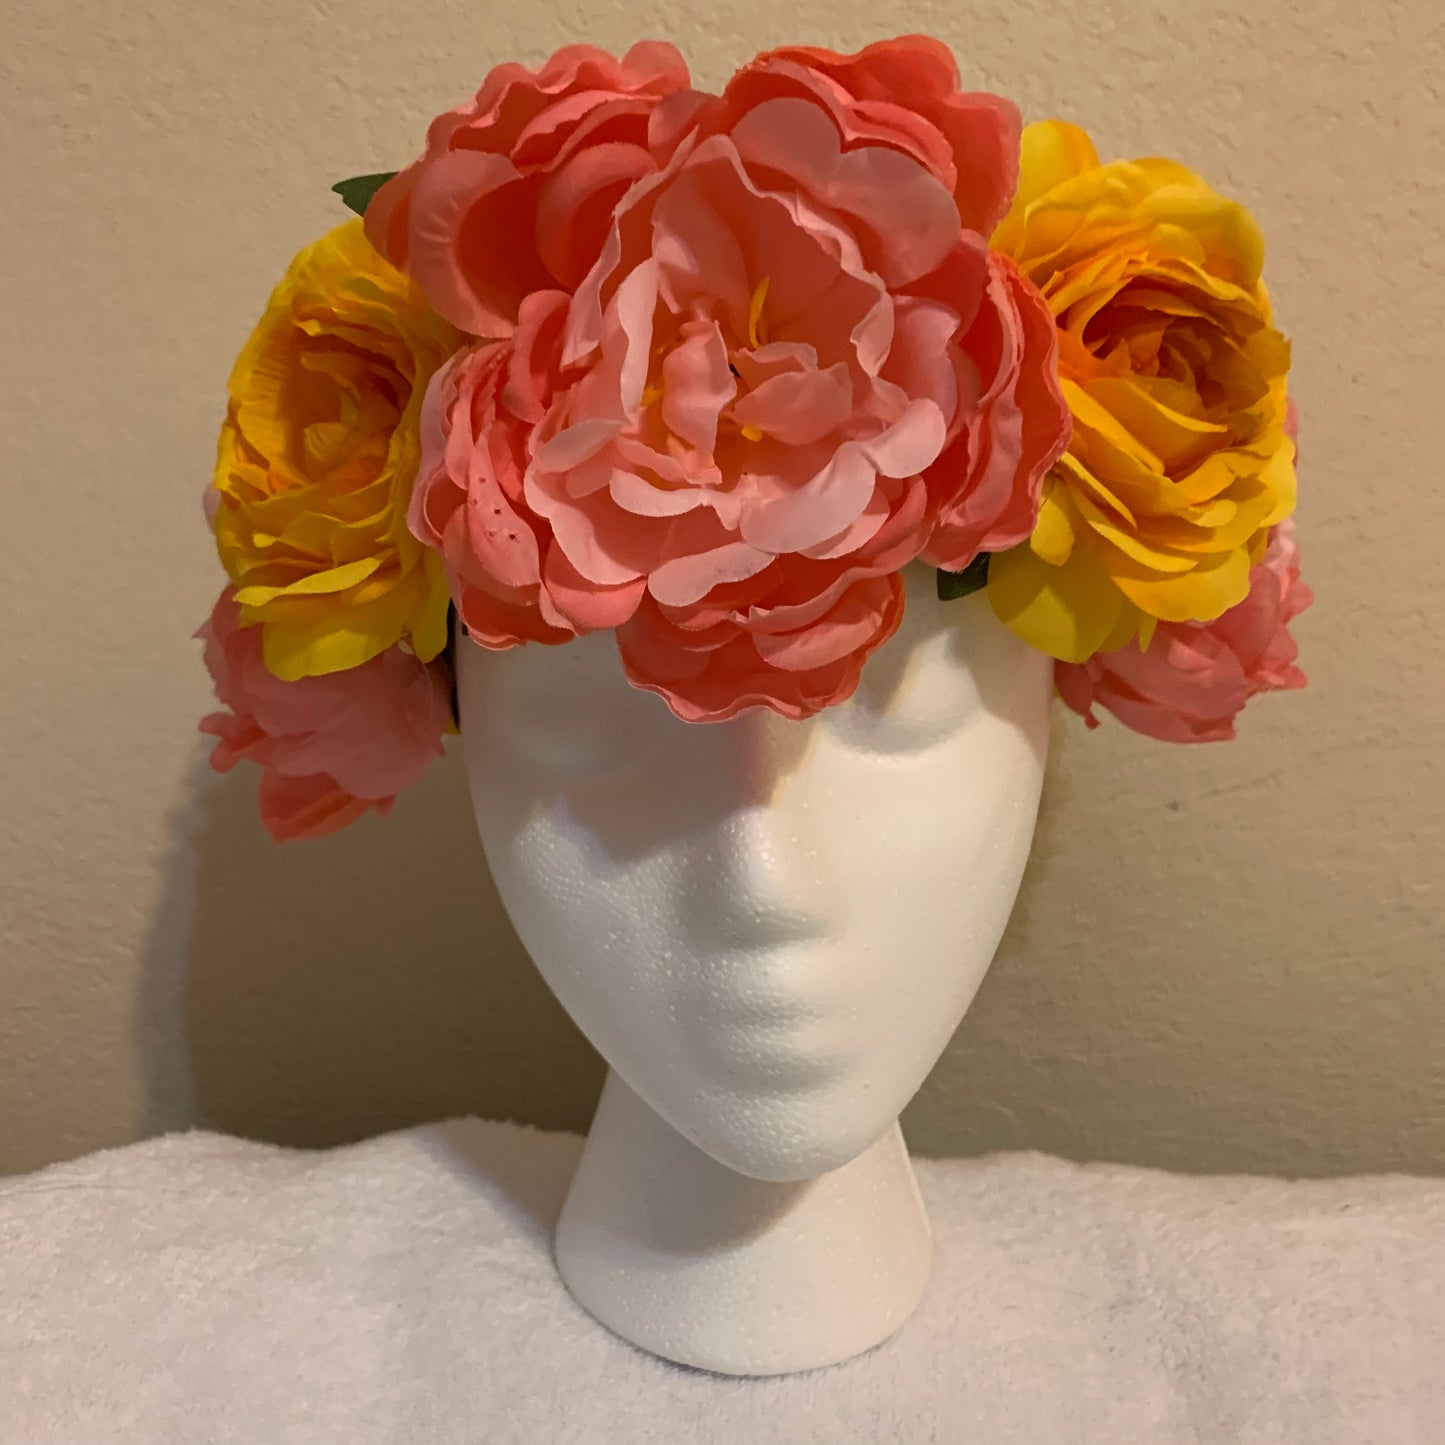 Large Wreath - Peach and Bright Yellow Flowers